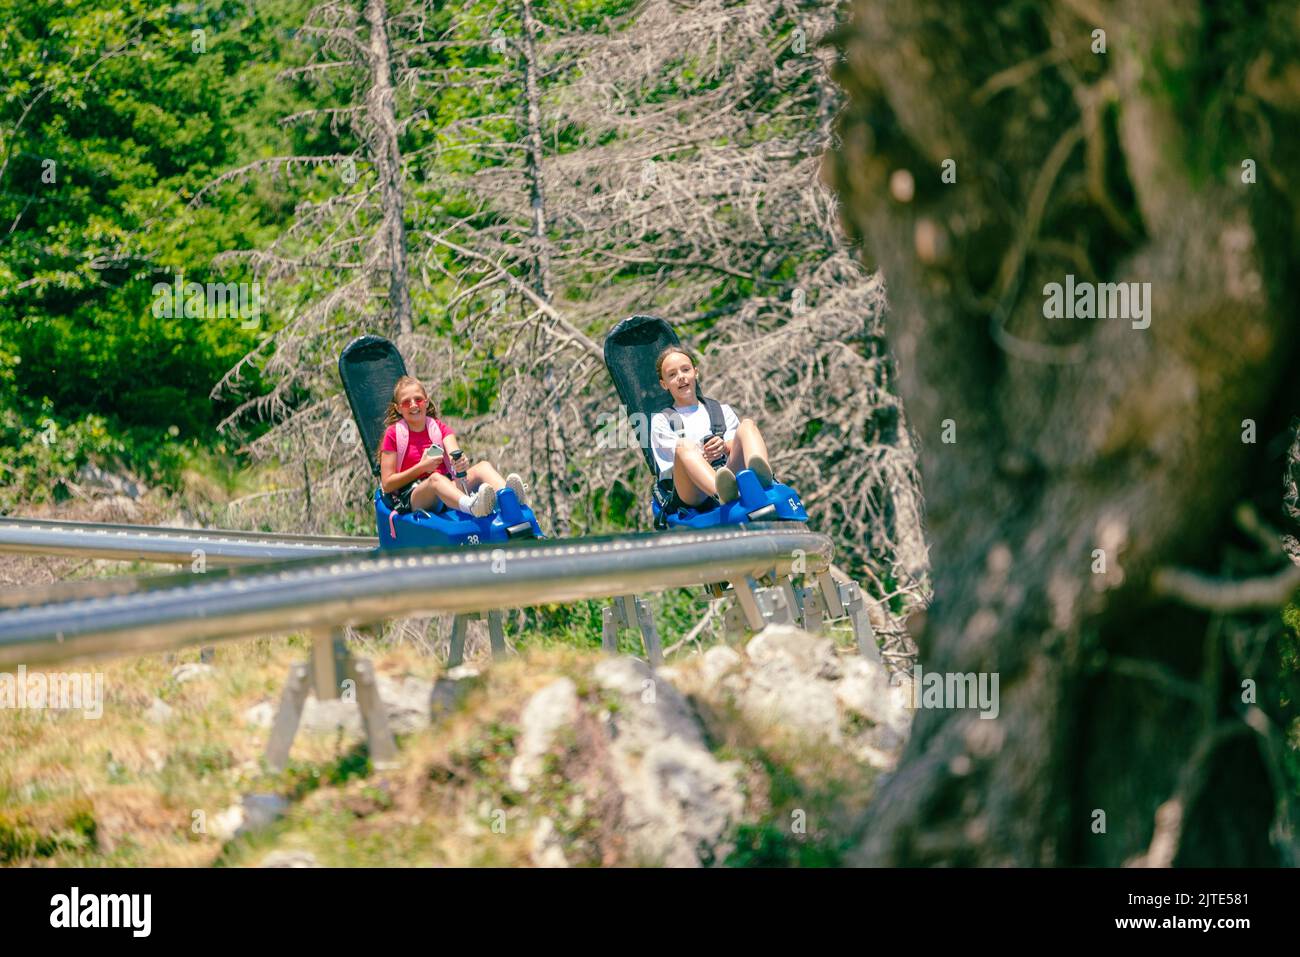 Girls ride a mountain roller coaster. Two mountain roller coasters. Tree ahead and a winding rail Stock Photo